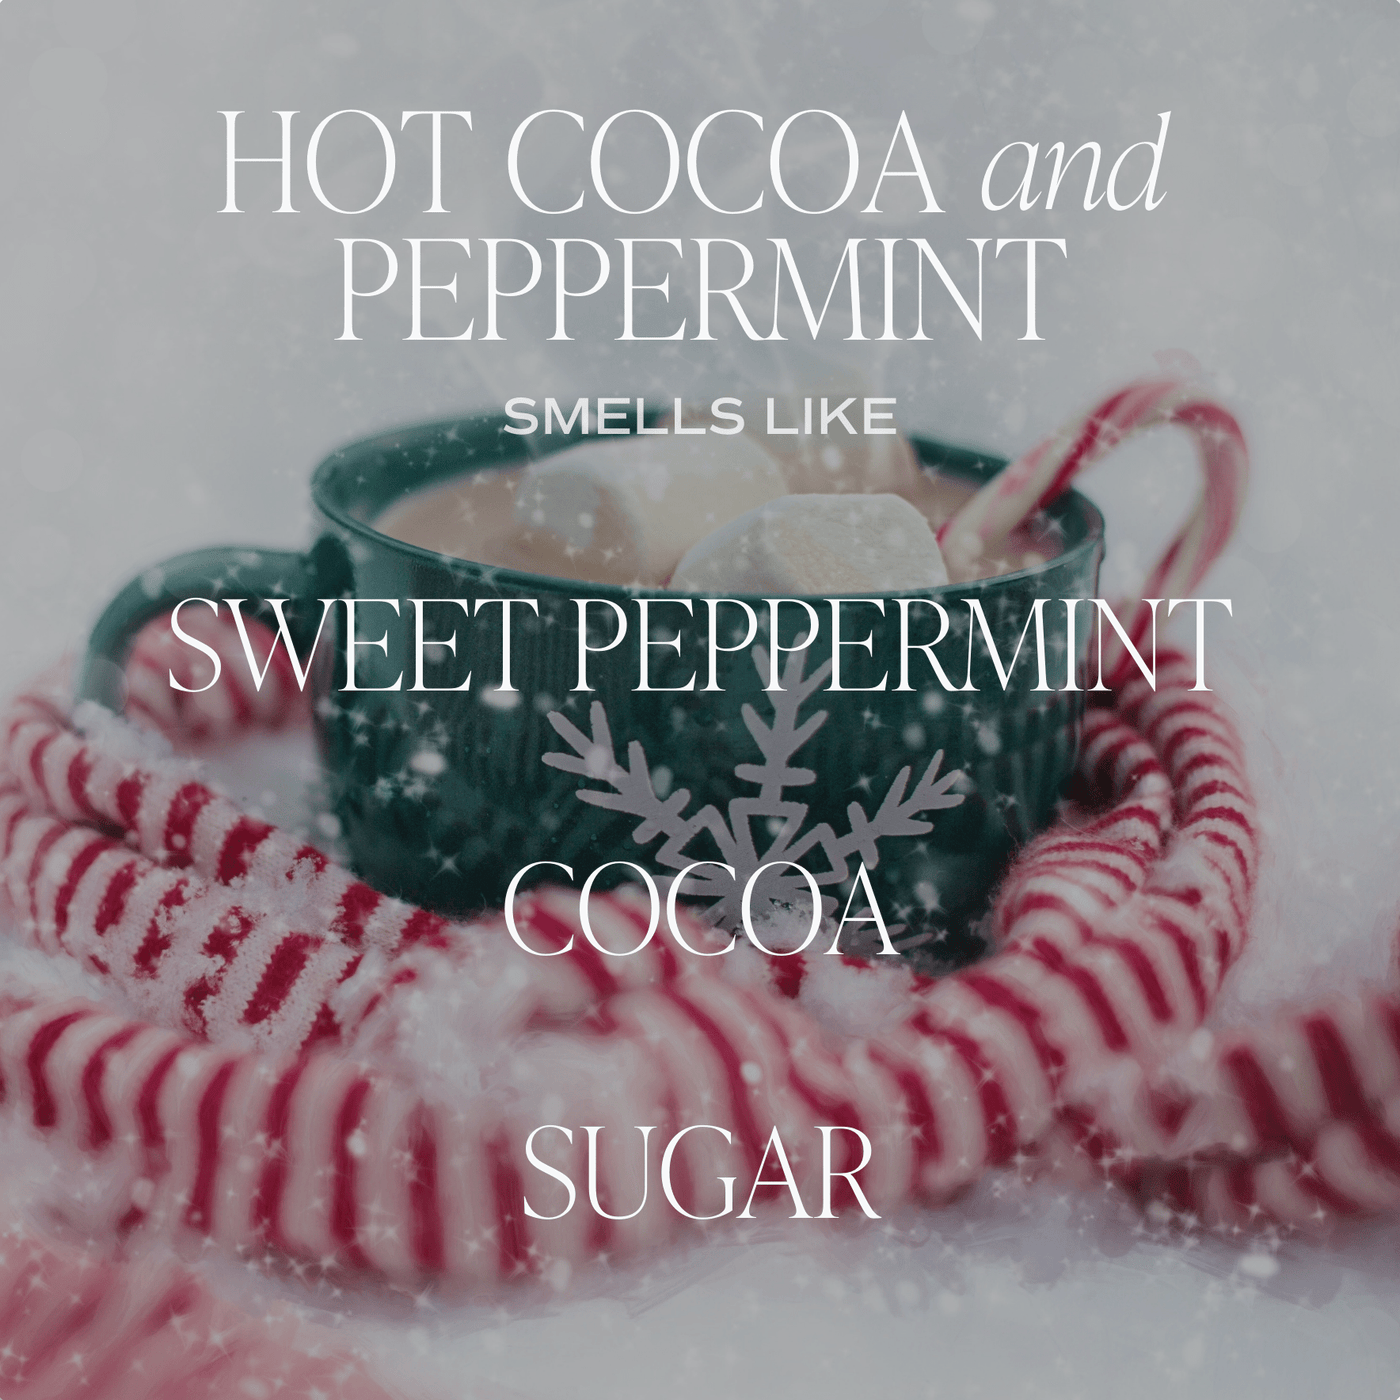 Hot Cocoa and Peppermint Soy Candle - Amber Jar - 9 oz - Sweet Water Decor - Candles